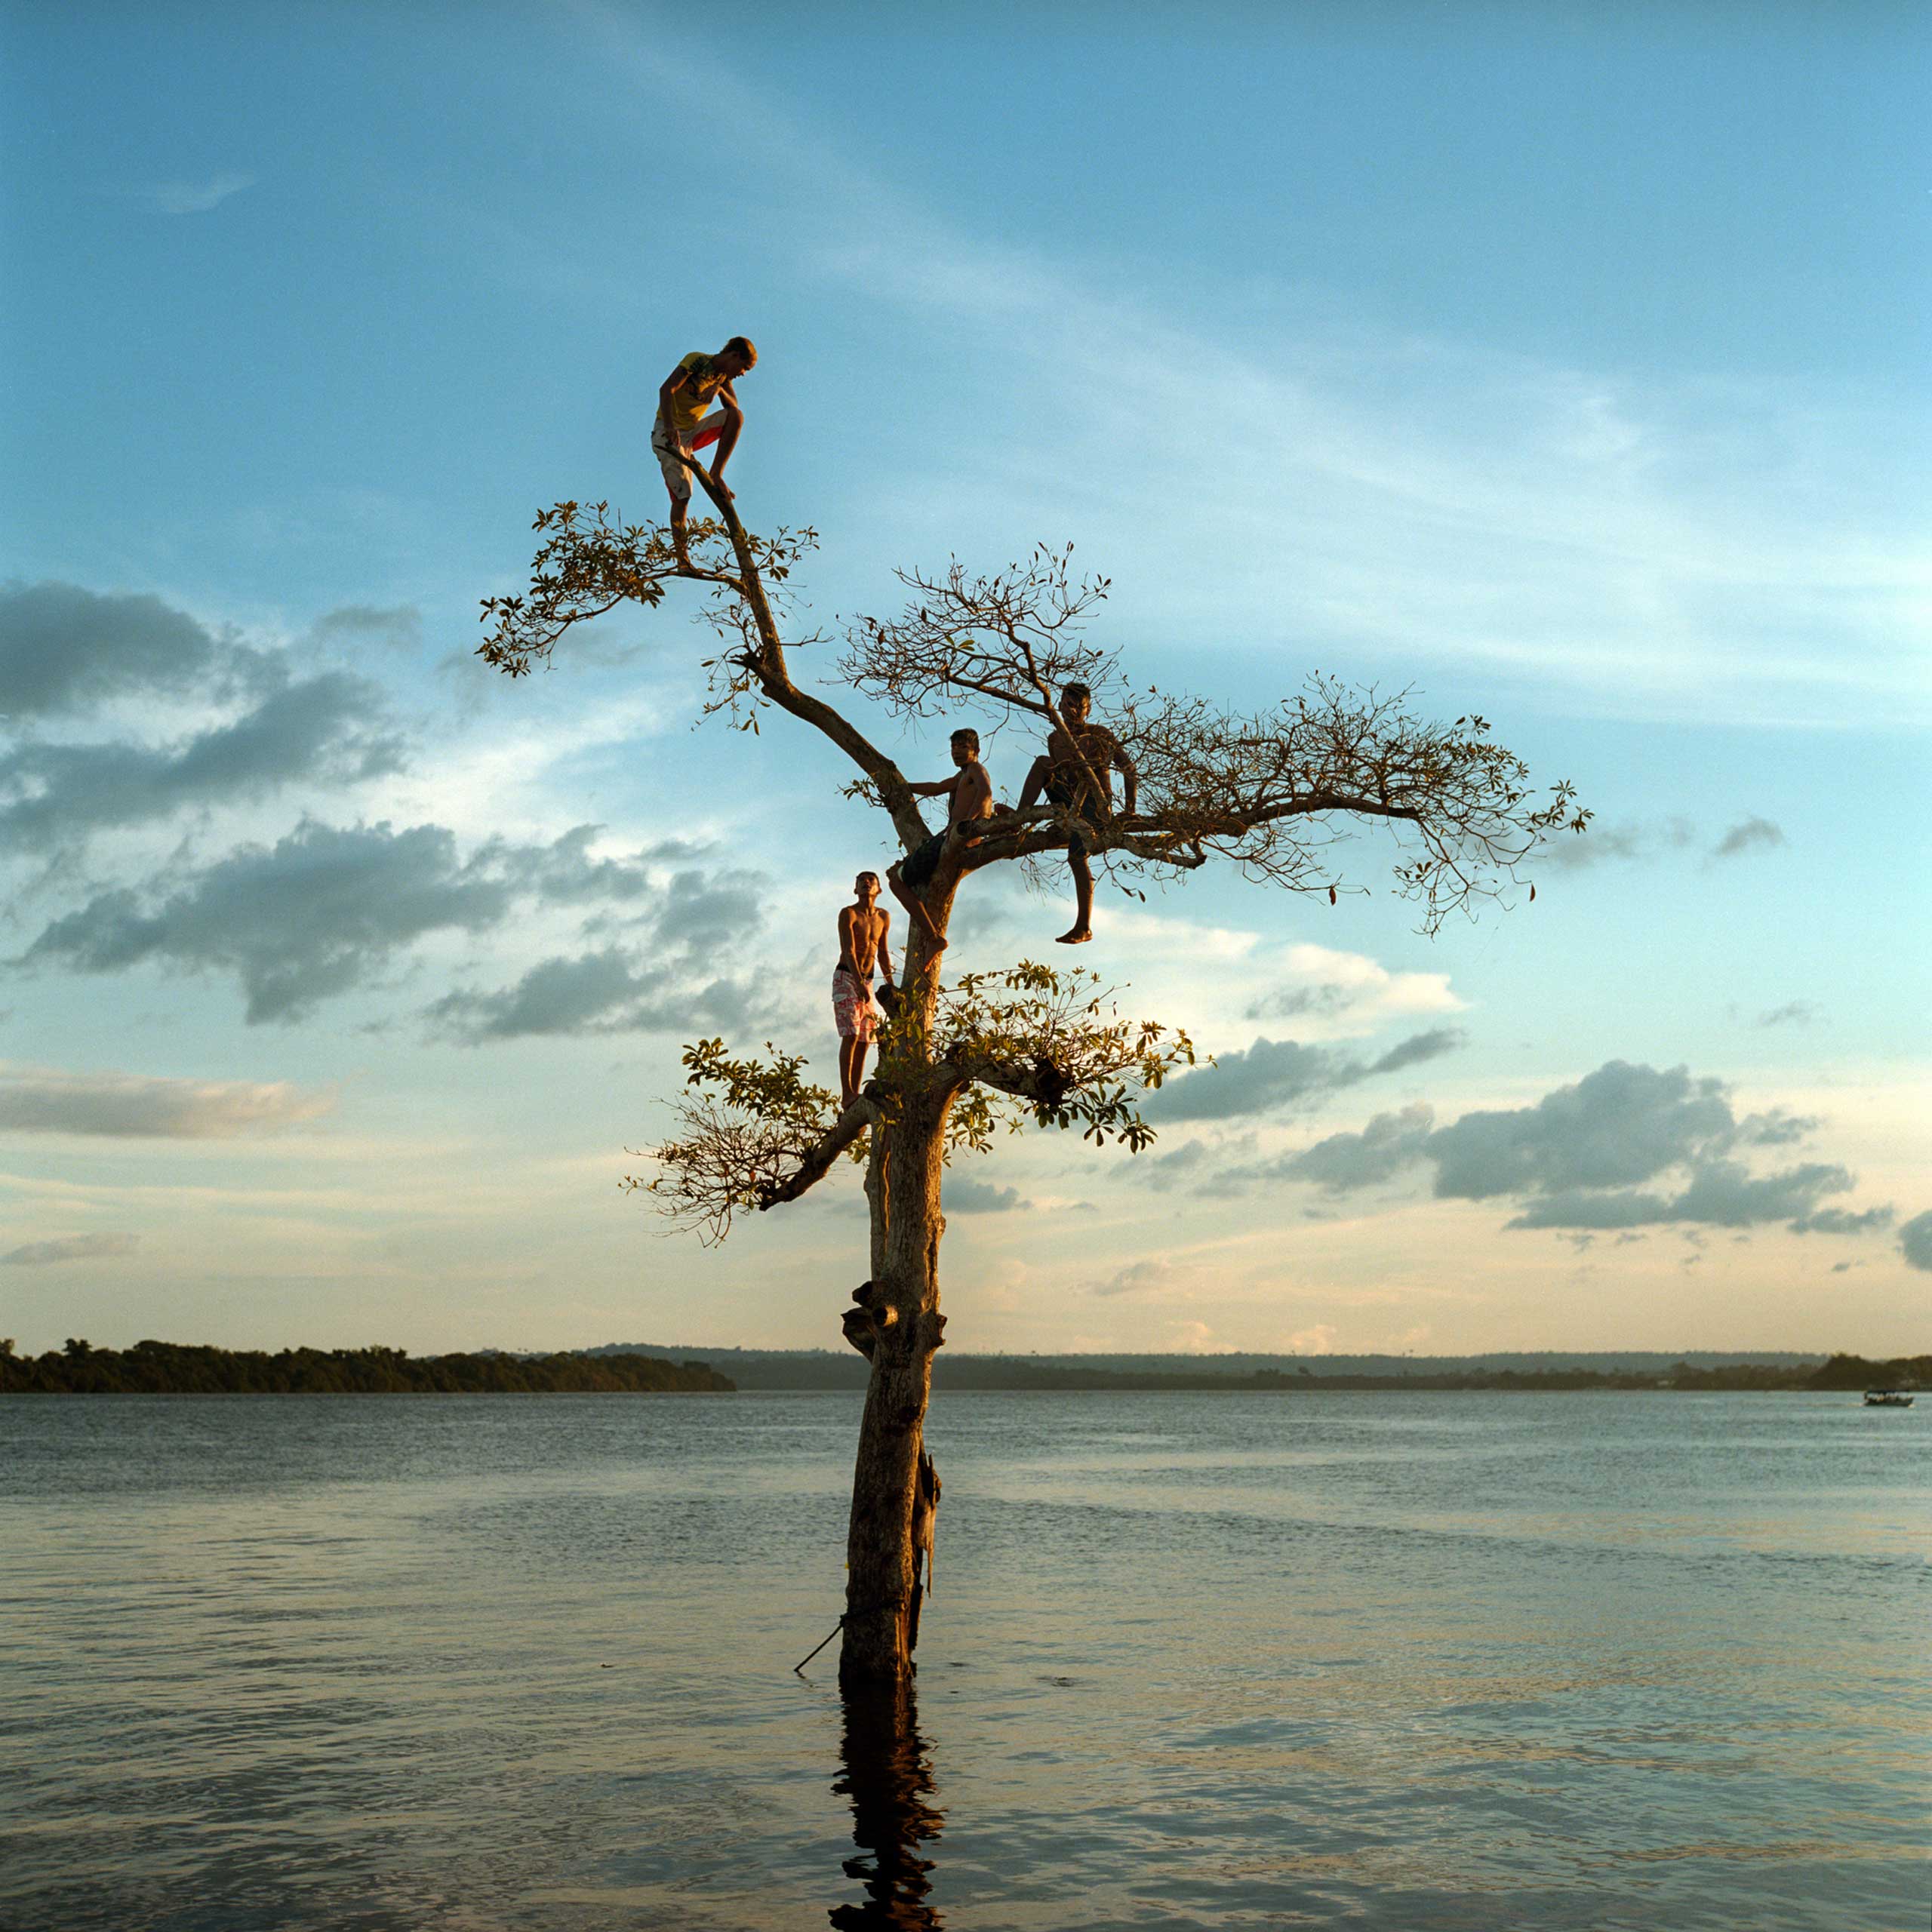 A group of boys climb a tree on the Xingu River by the city of Altamira, Brazil. One third of the city will be permanently flooded by the nearby Belo Monte Dam, March 2014.